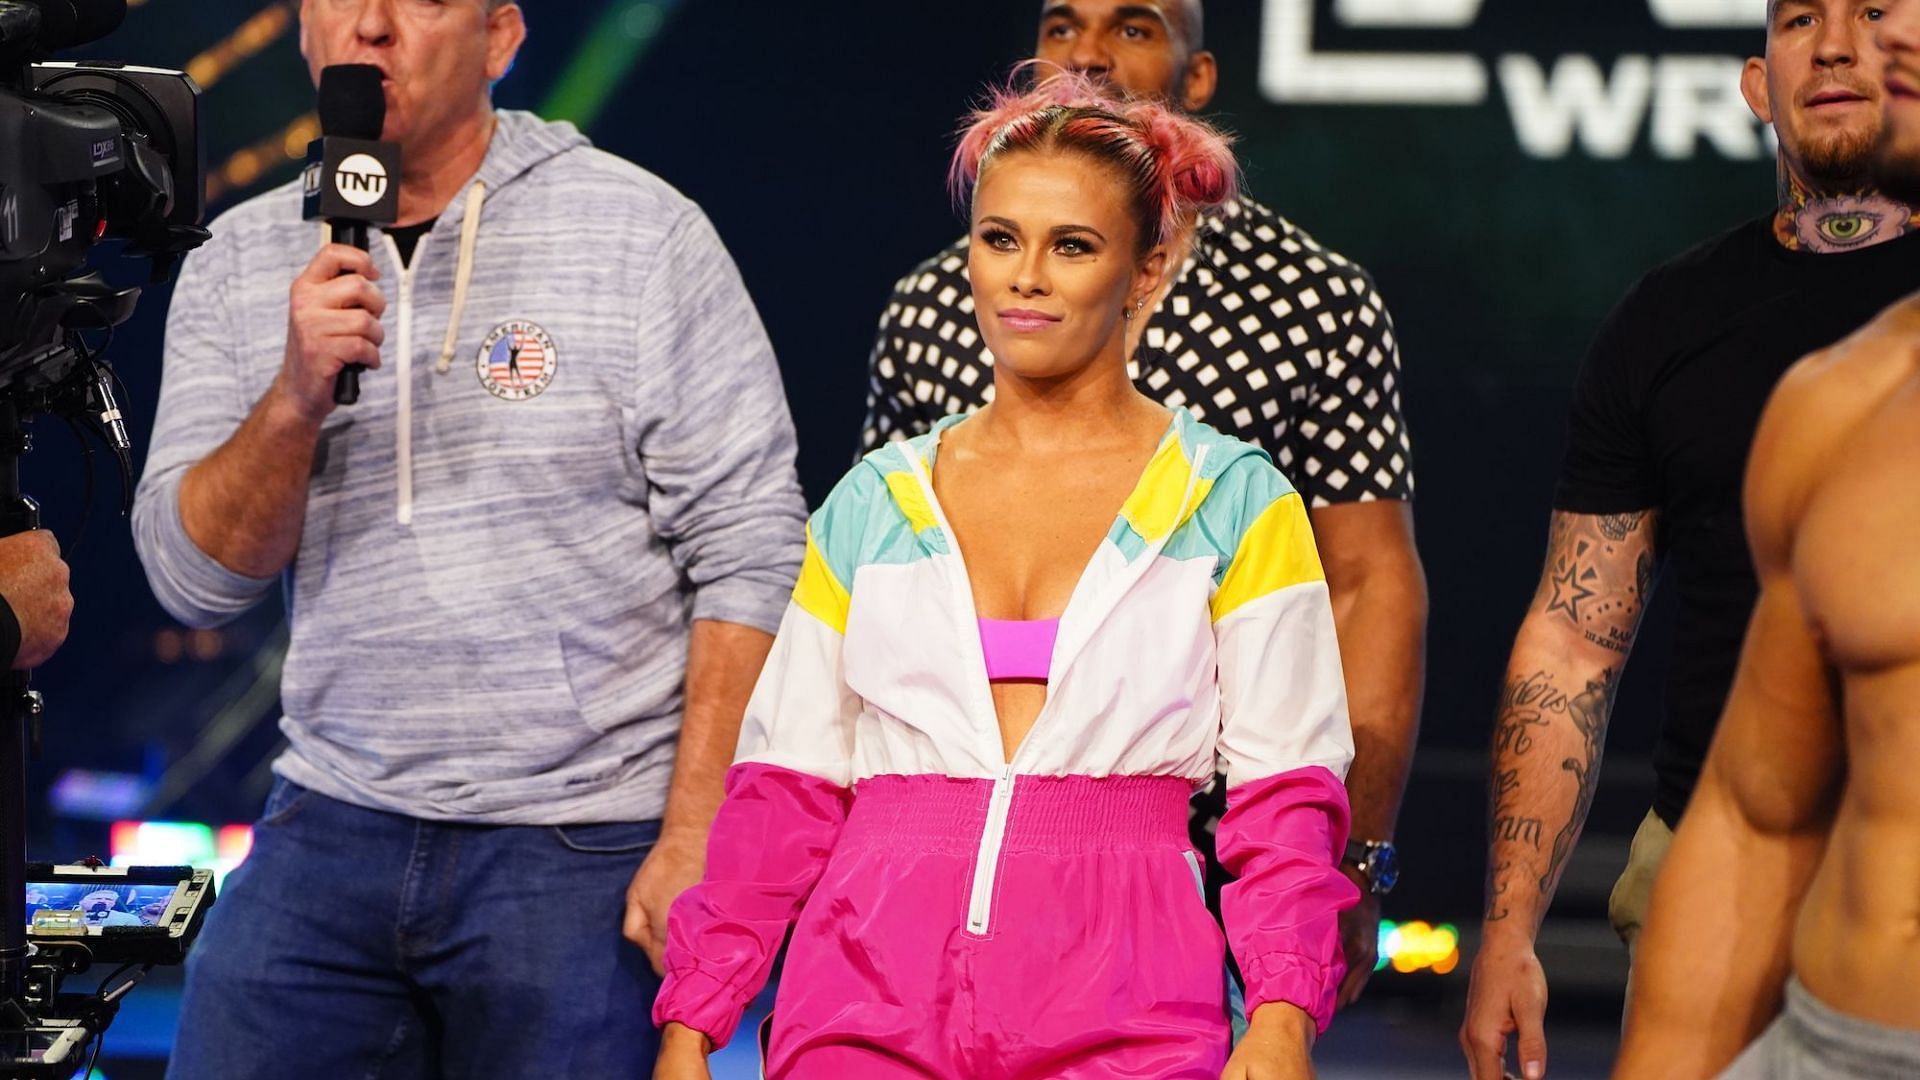 Paige VanZant is a well-known MMA Fighter who once made appearances in AEW